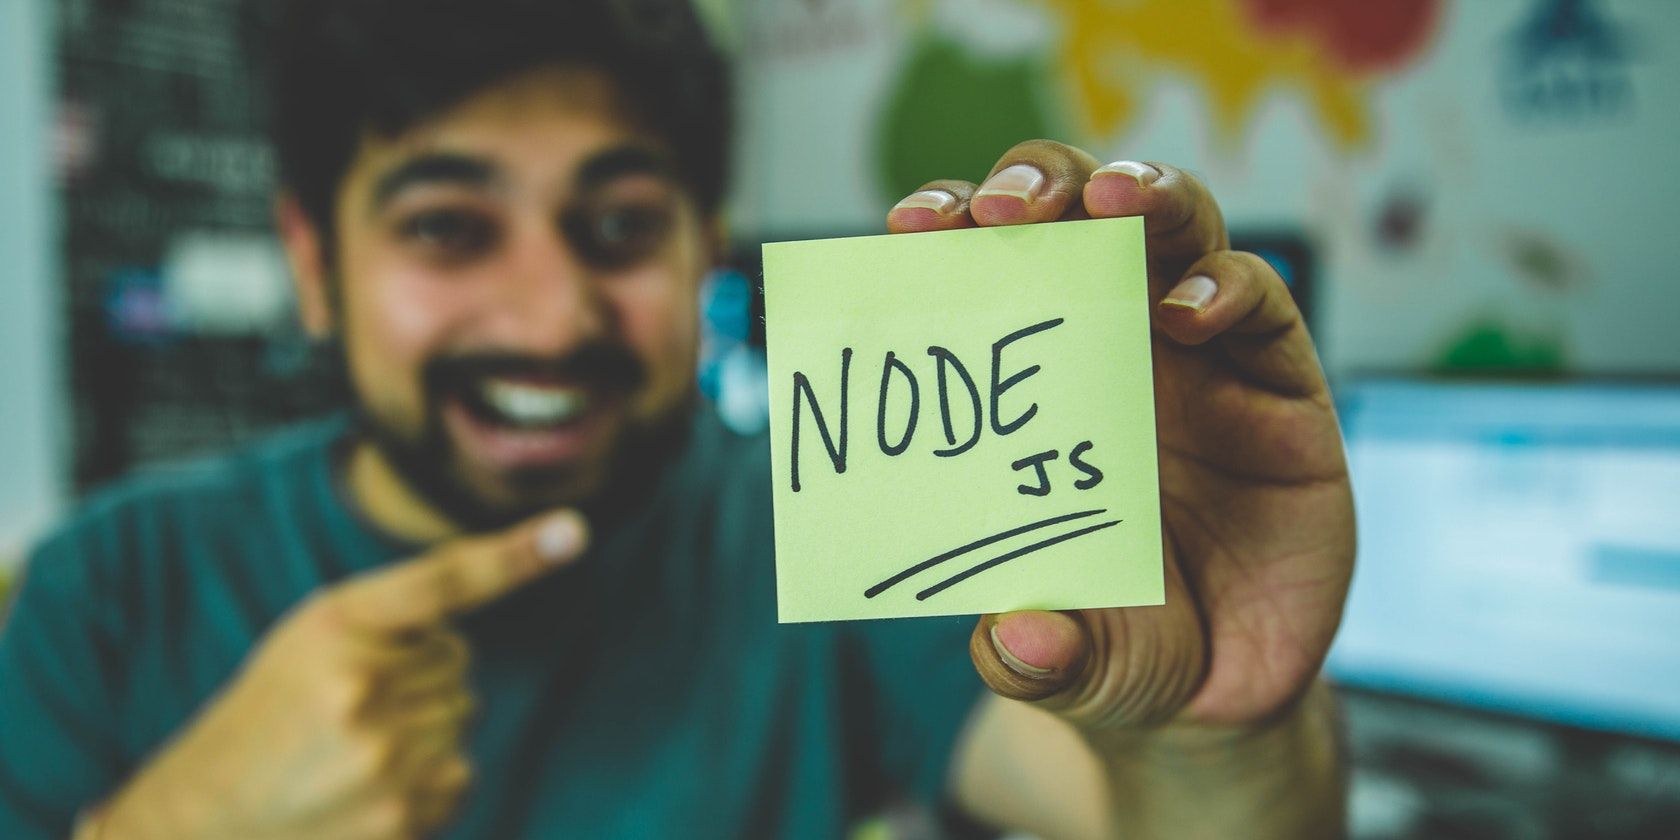 Man holding up a yellow square of card with “Node.js” written on it.